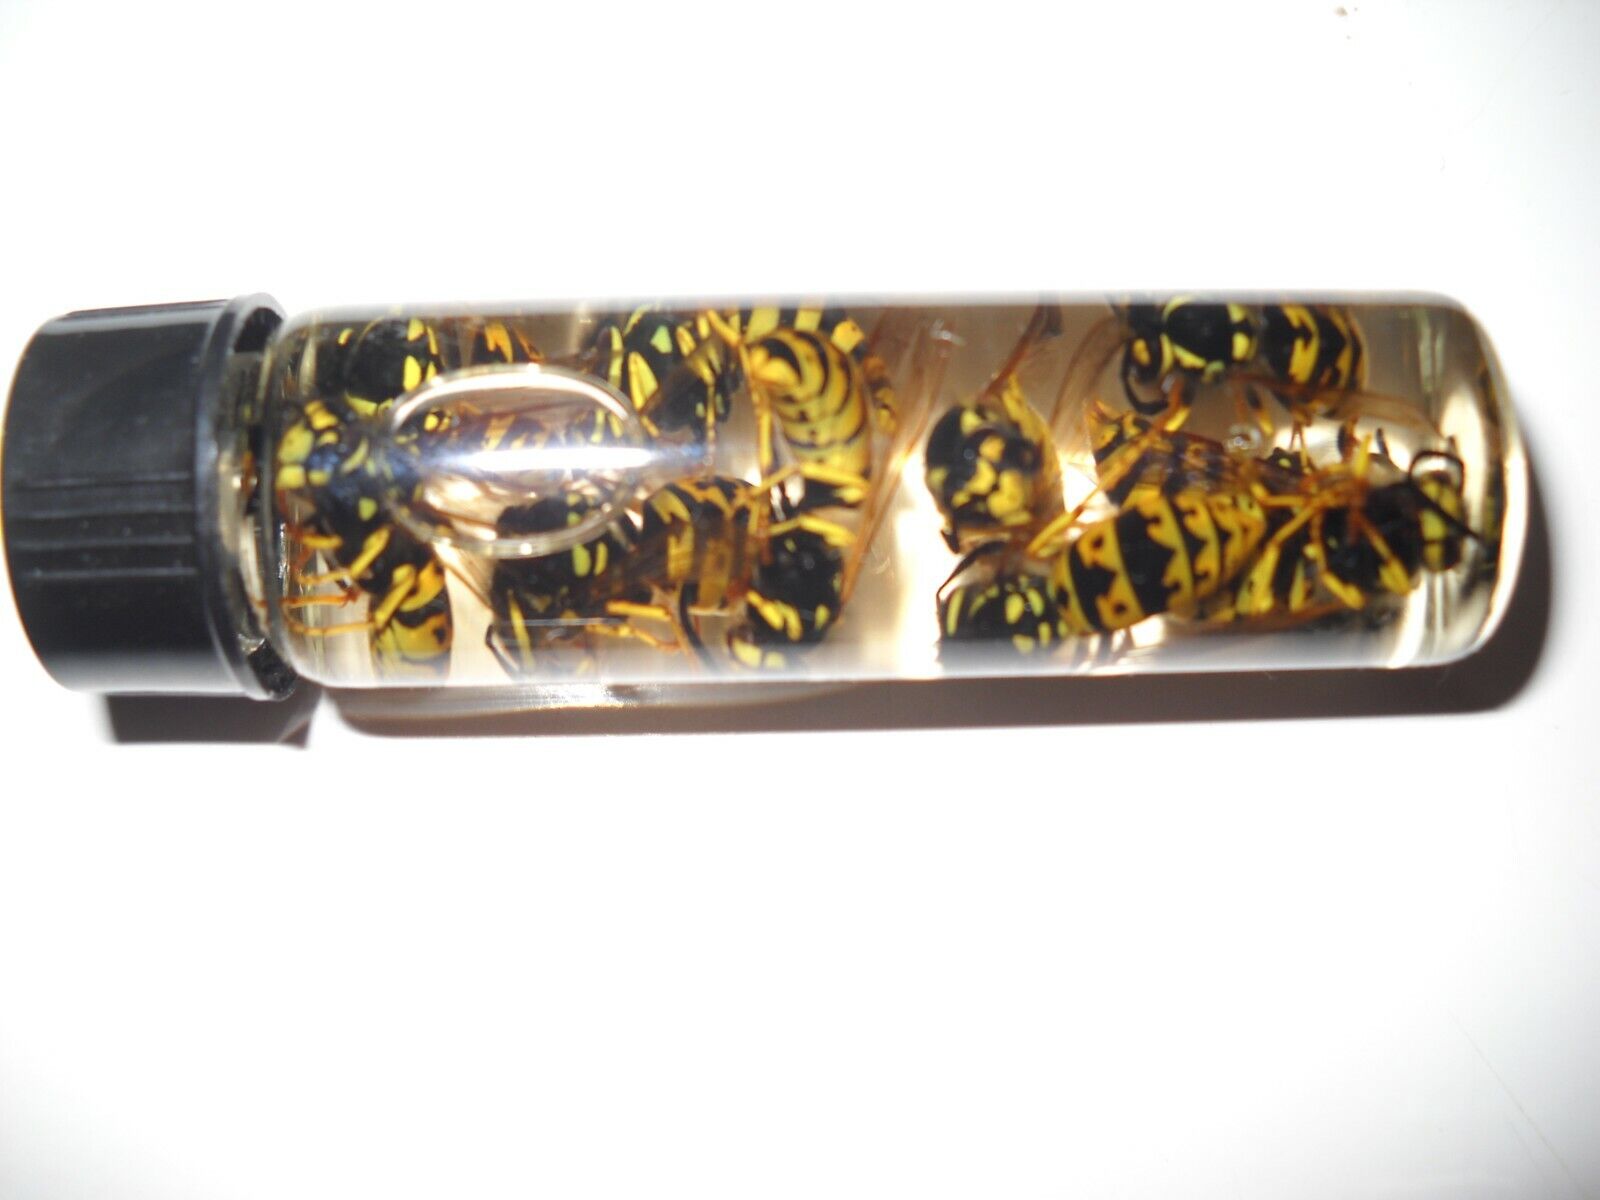 50 WET REAL Bees YELLOW JACKET WASP Wet SPECIMEN INSECT You Get 50